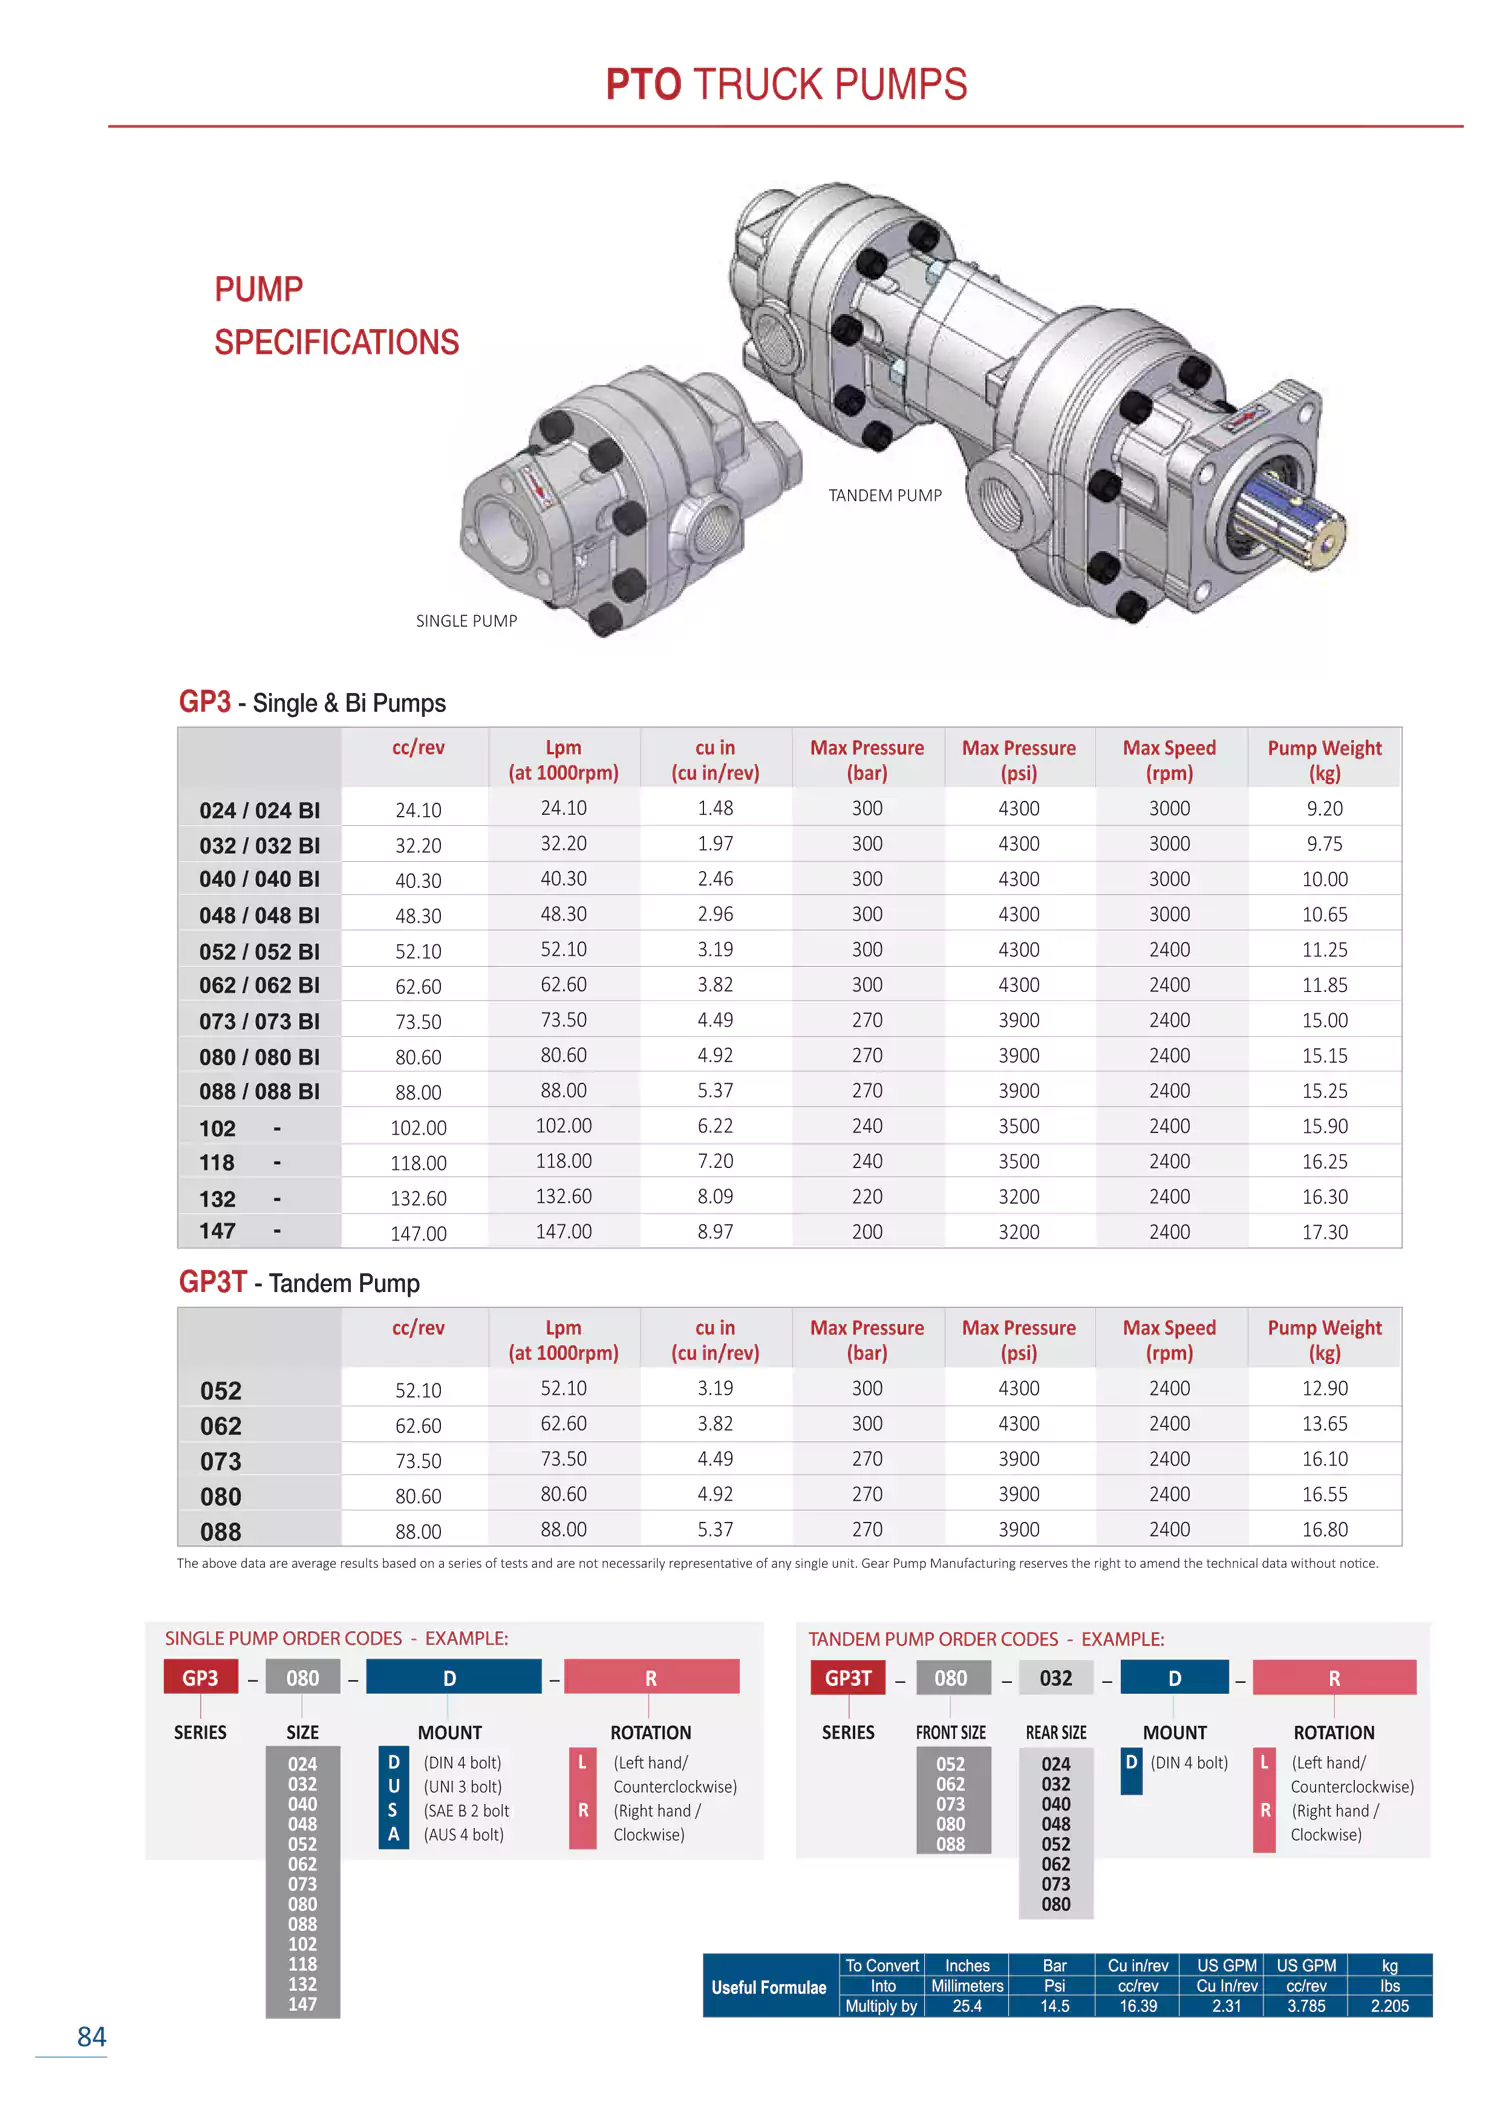 Page-84 - PTO Truck Pumps - Specifications